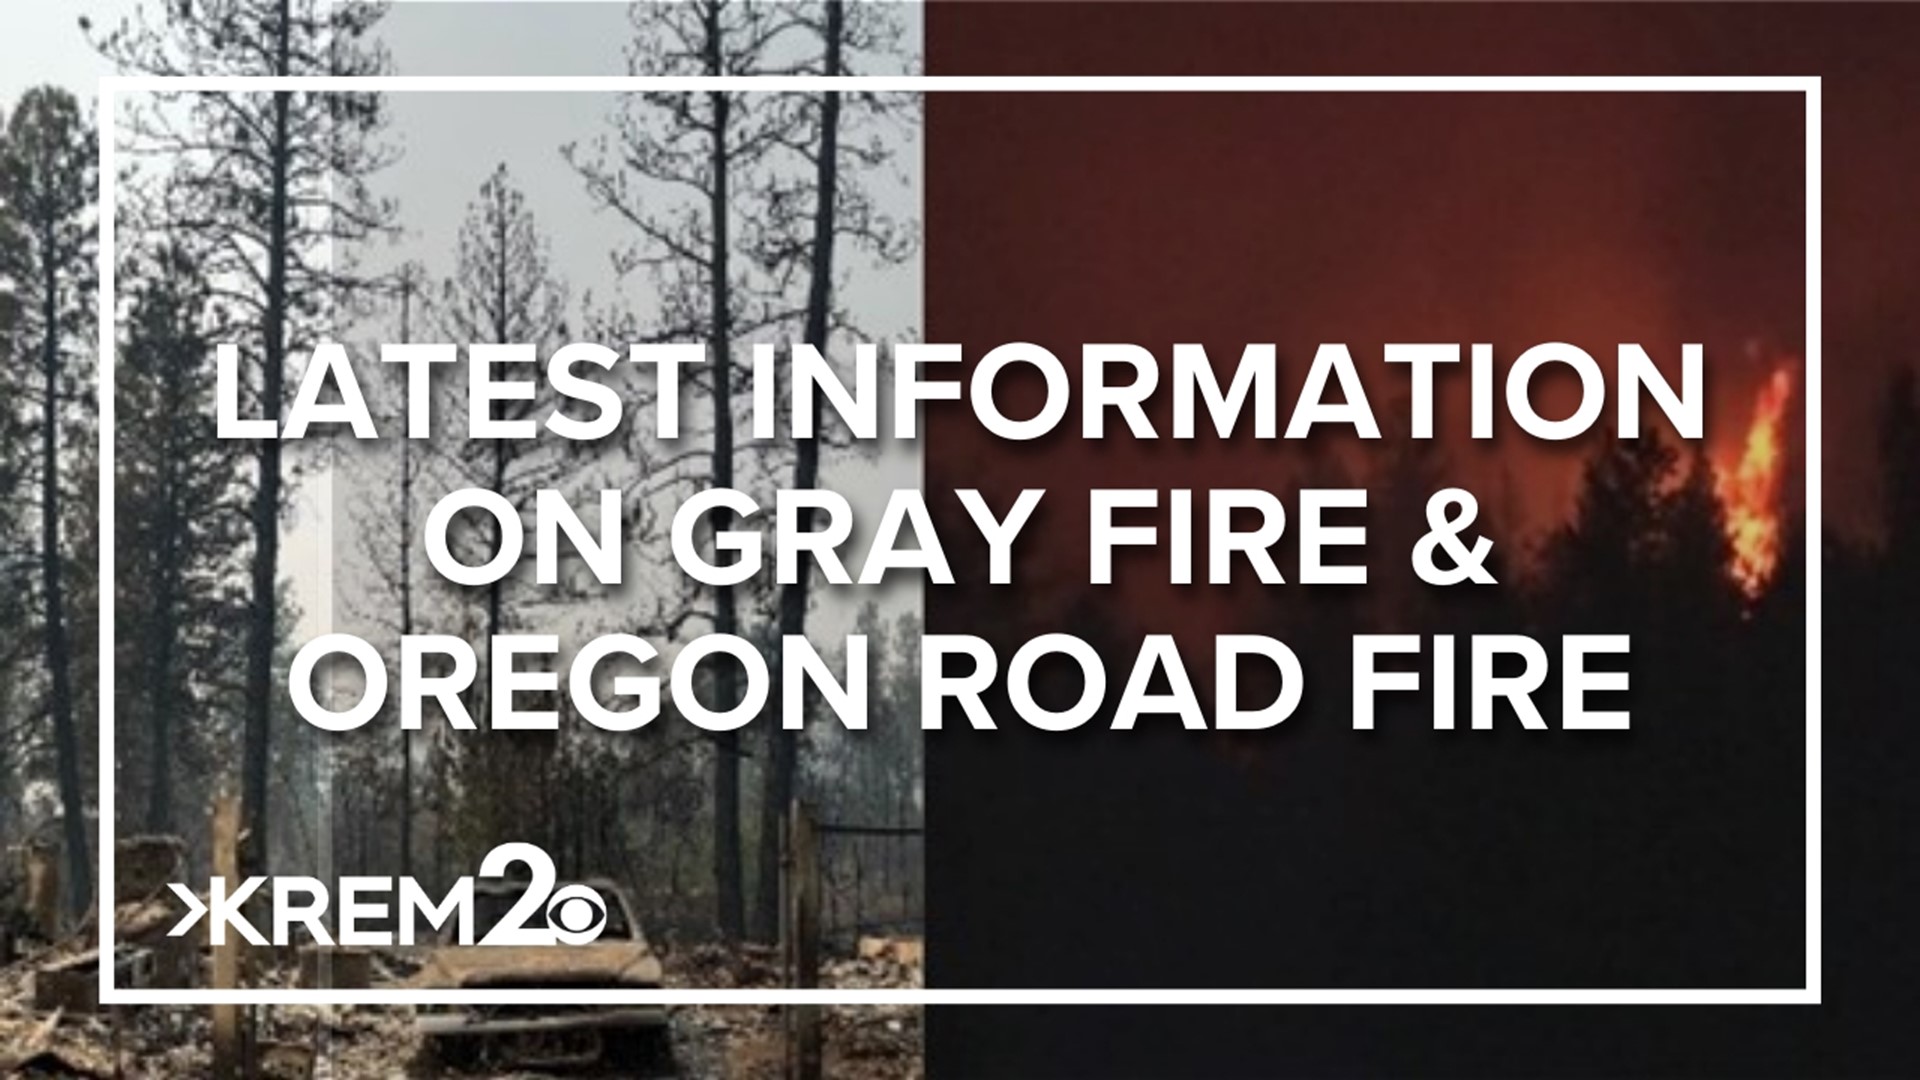 The 2 fires combined have burned over 20,000 acres in eastern Washington. On Monday, many residents were let back in their homes due to downgraded evacuations.